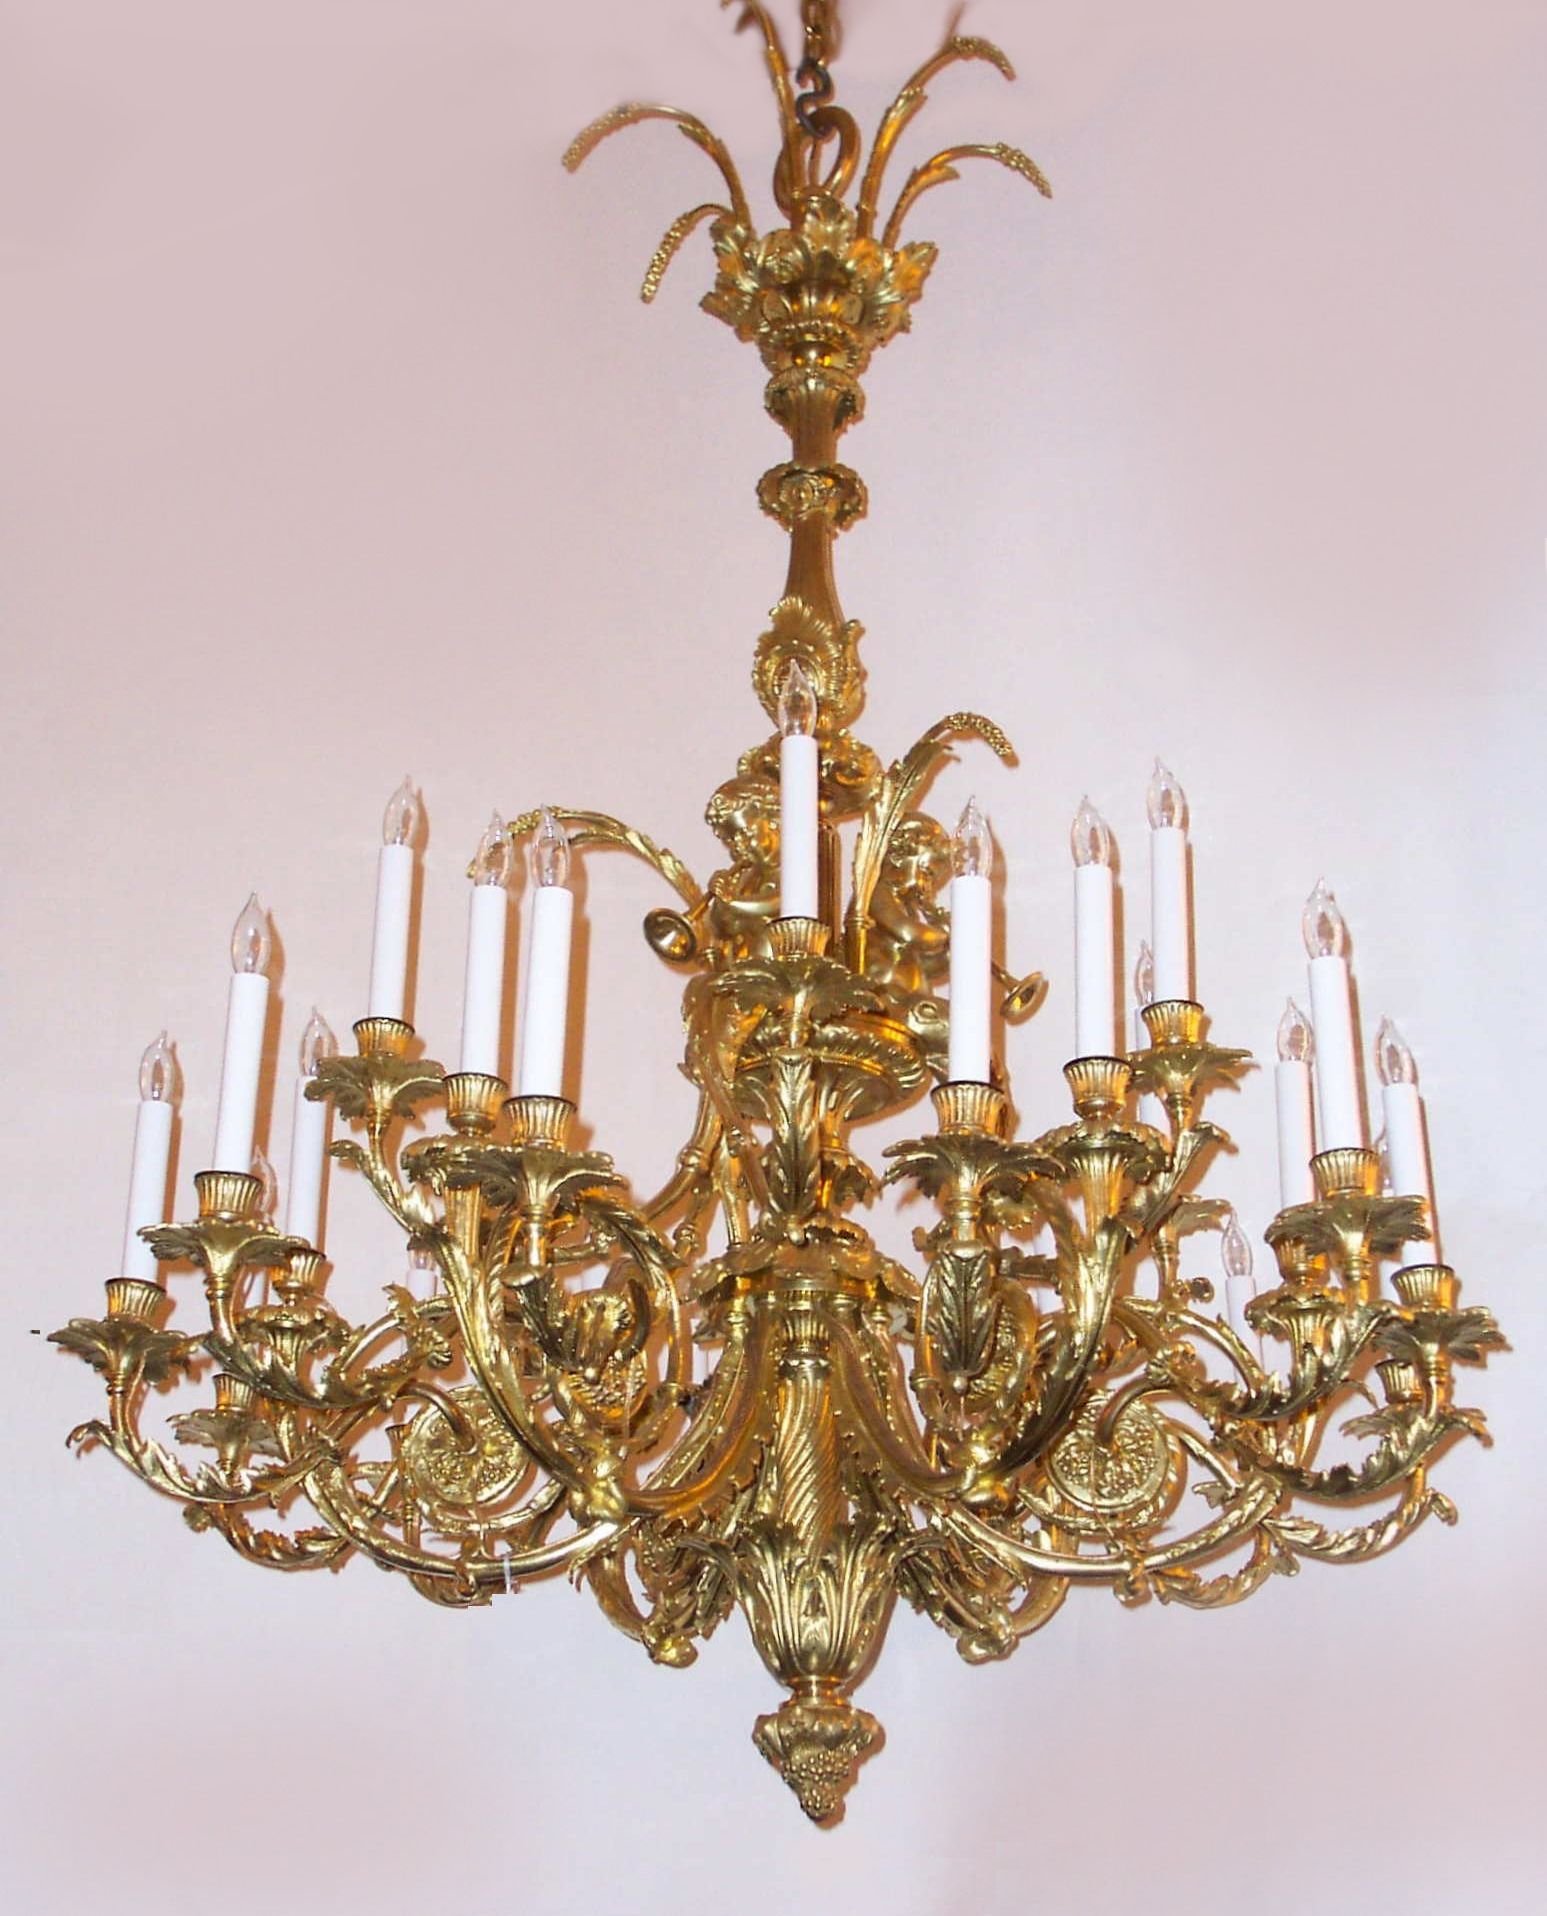 Antique French Louis 16th Gold Bronze Marie Antoinette Chandelier Intended For Antique French Chandeliers (View 5 of 15)